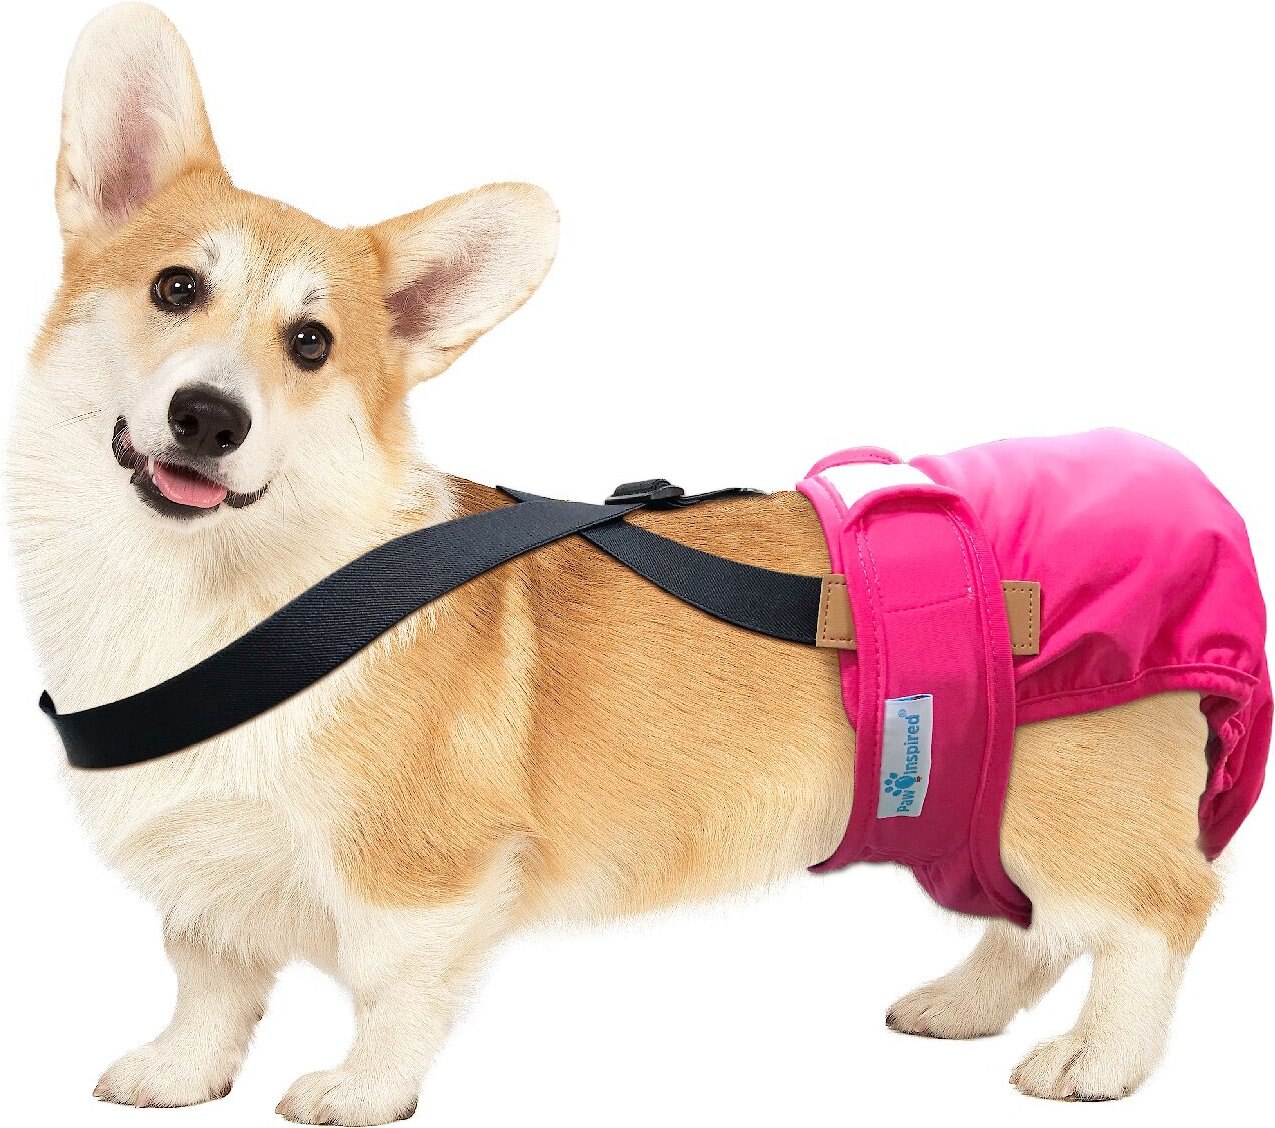 dog diaper covers with suspenders